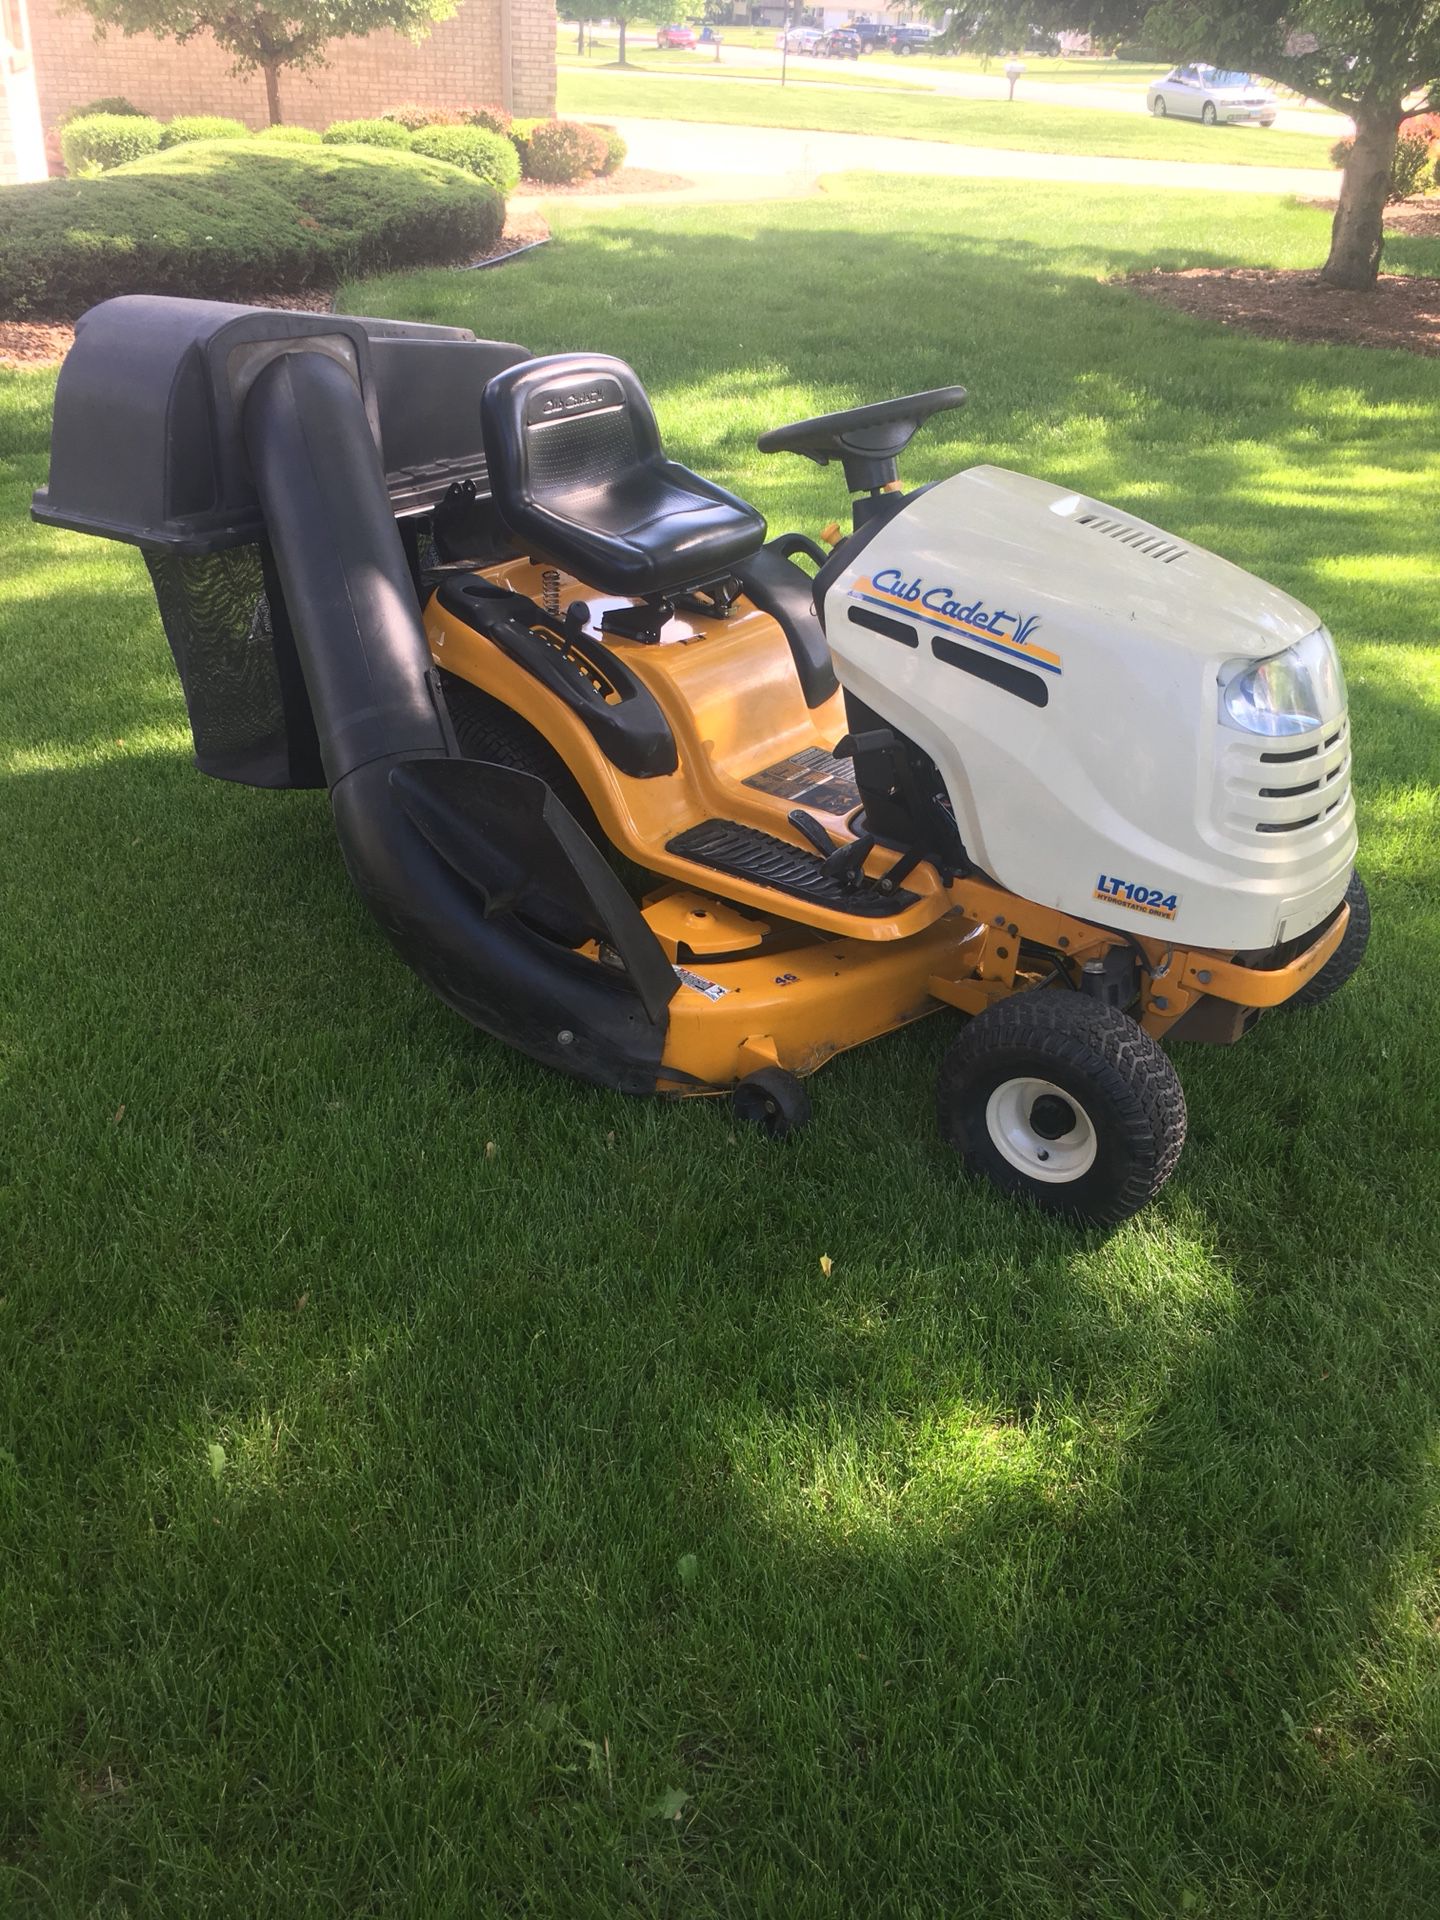 Cub Cadet Lt1024 Riding Mower For Sale In Joliet Il Offerup